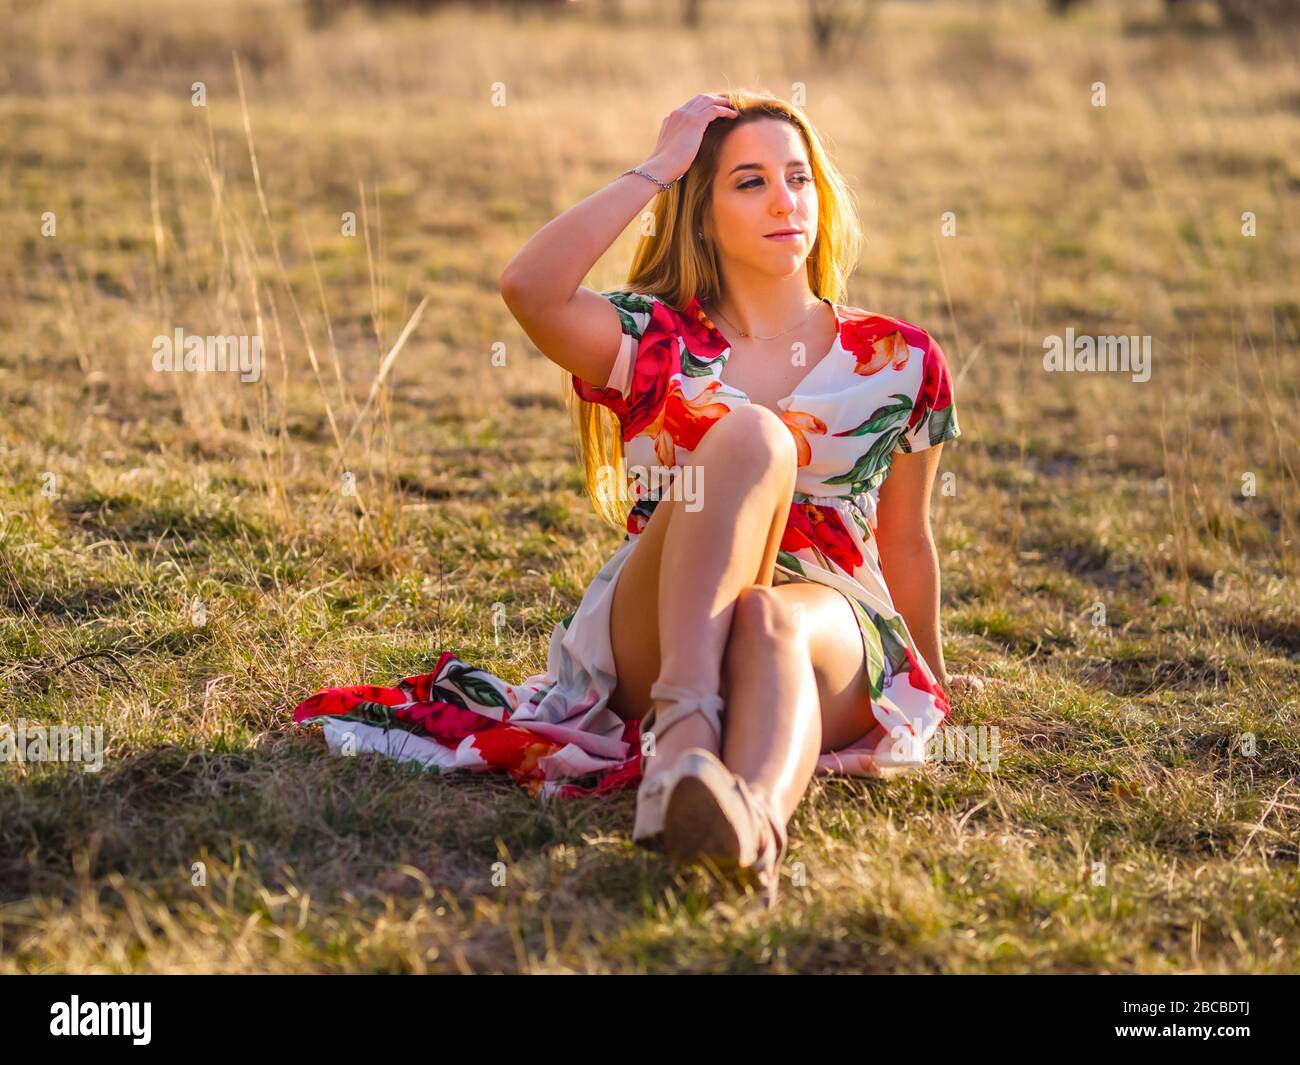 Teenage female person aka young woman sitting on grass-field looking ...